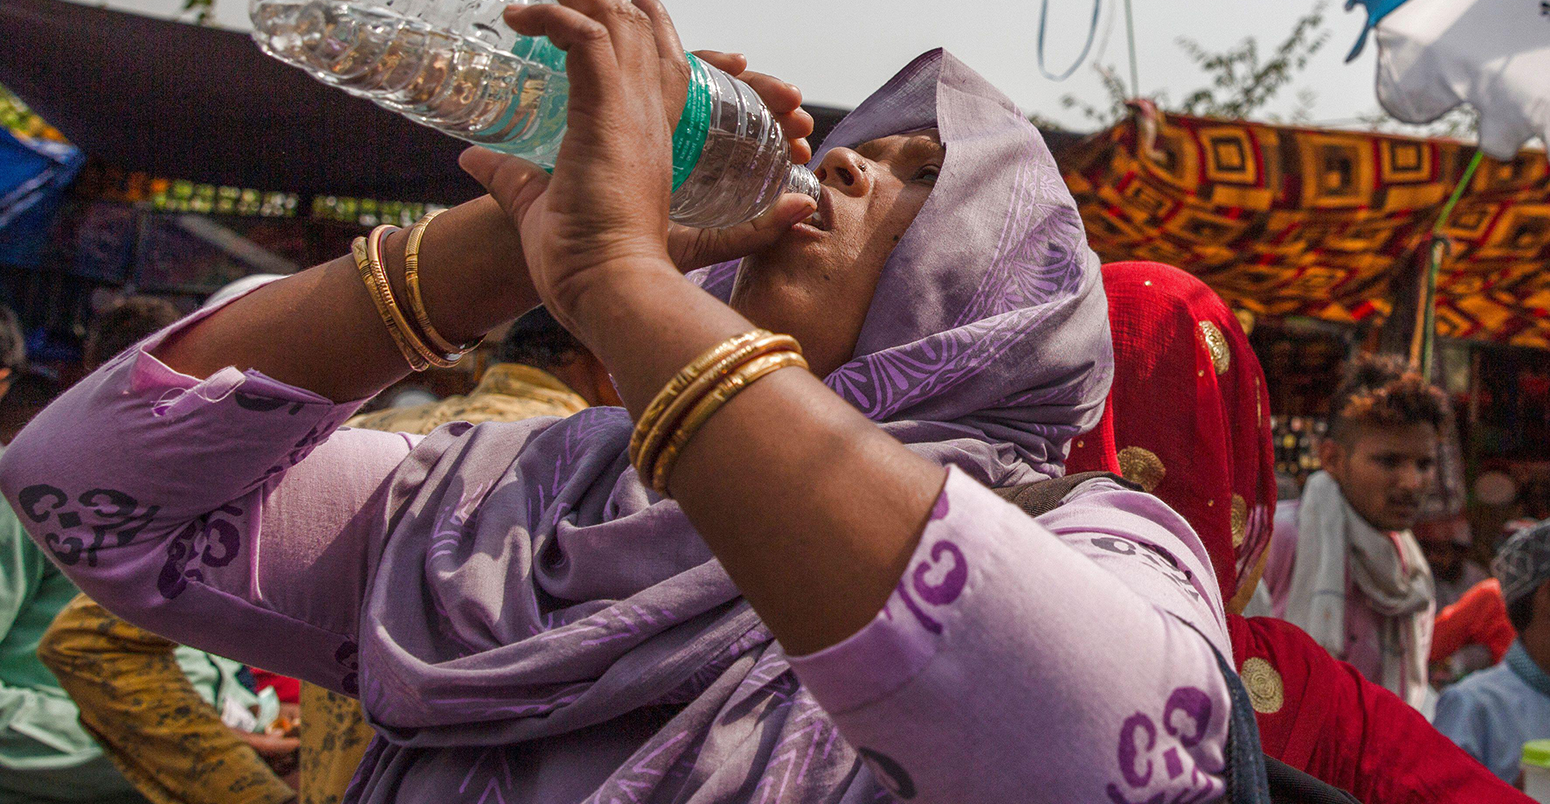 A woman drinks water during a hot day in New Delhi, April 29, 2022